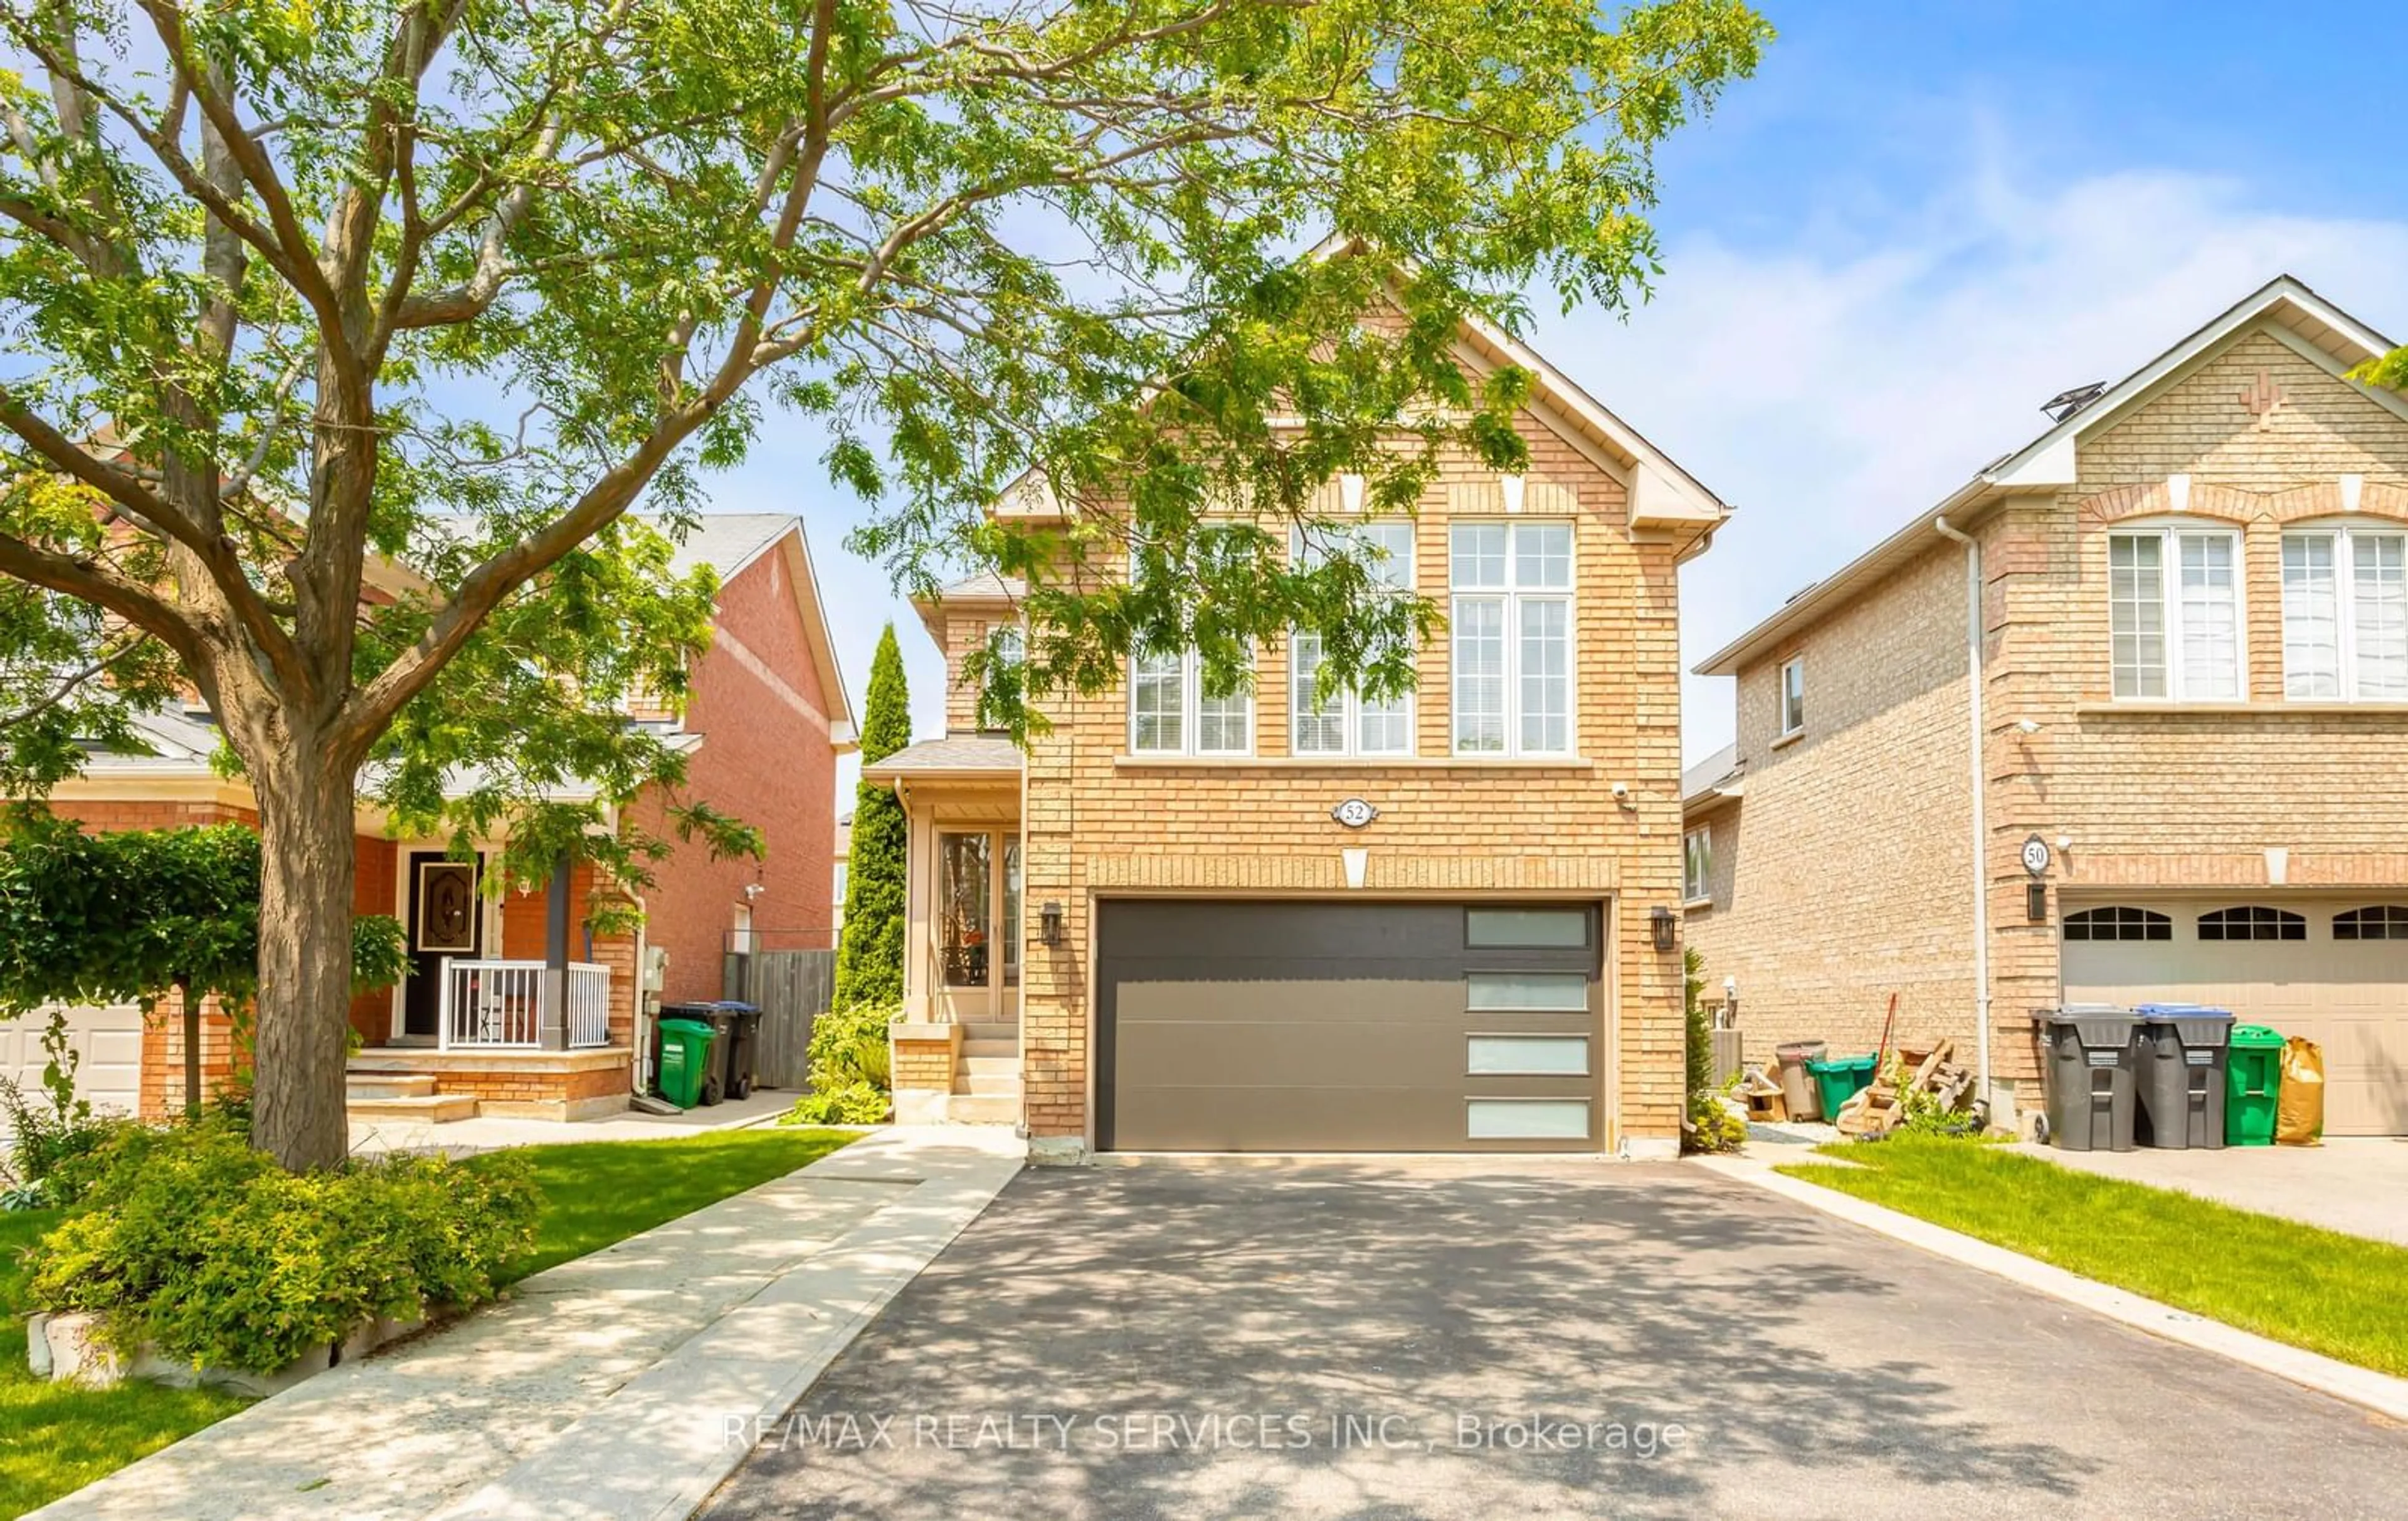 Home with brick exterior material for 52 Sunny Glen Cres, Brampton Ontario L7A 2C6